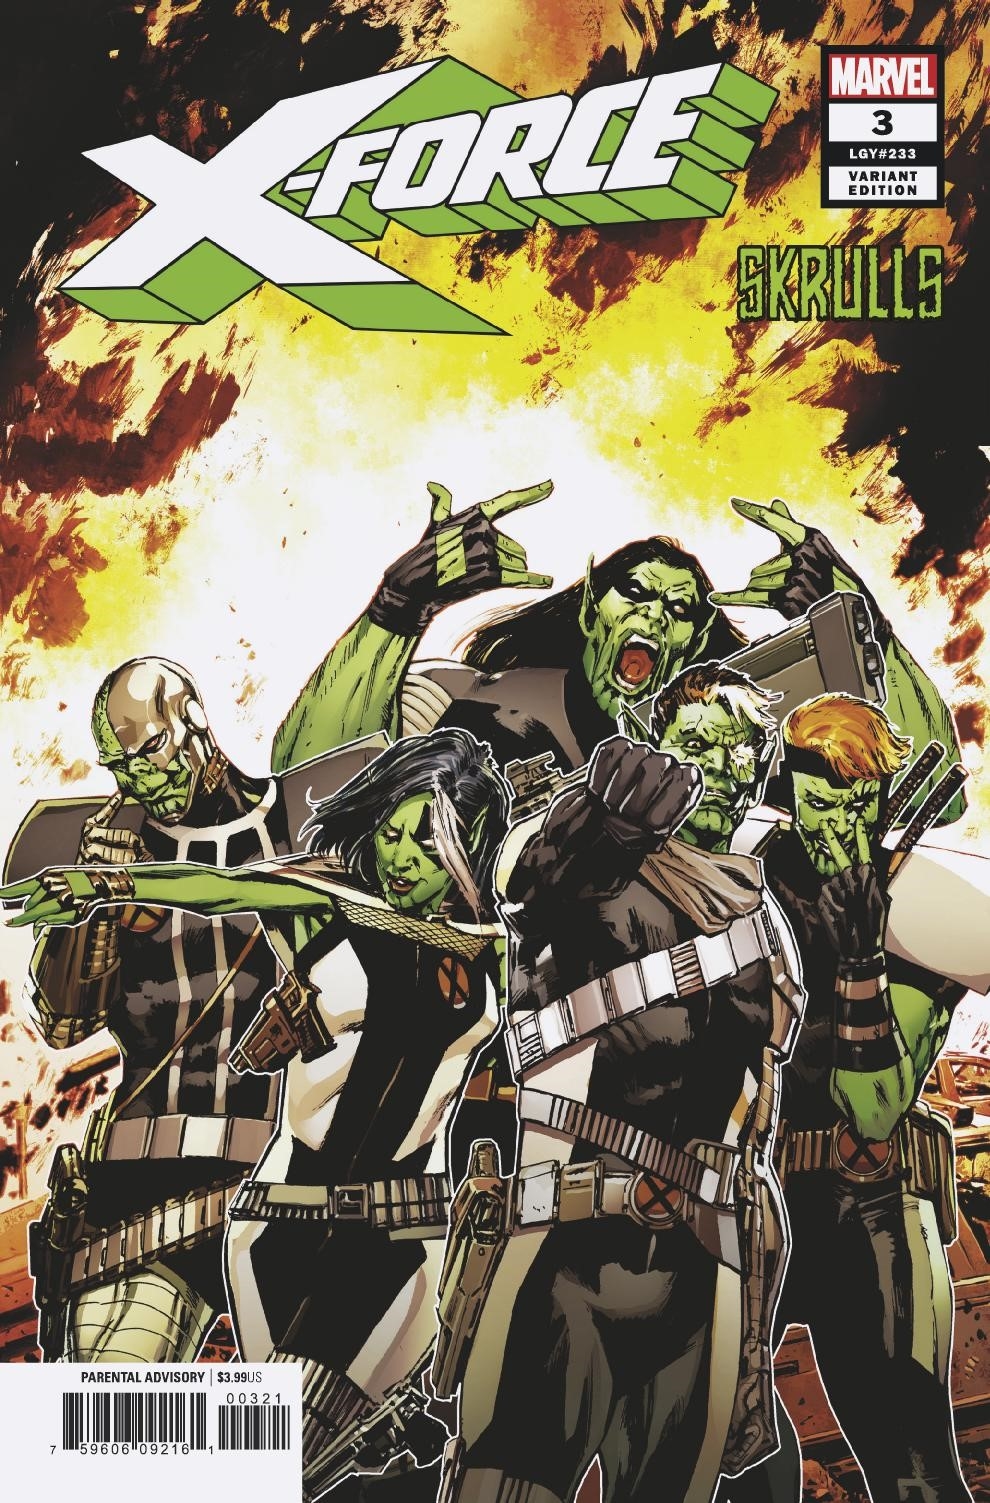 X-Force no. 3 (Variant) (2018 Series)